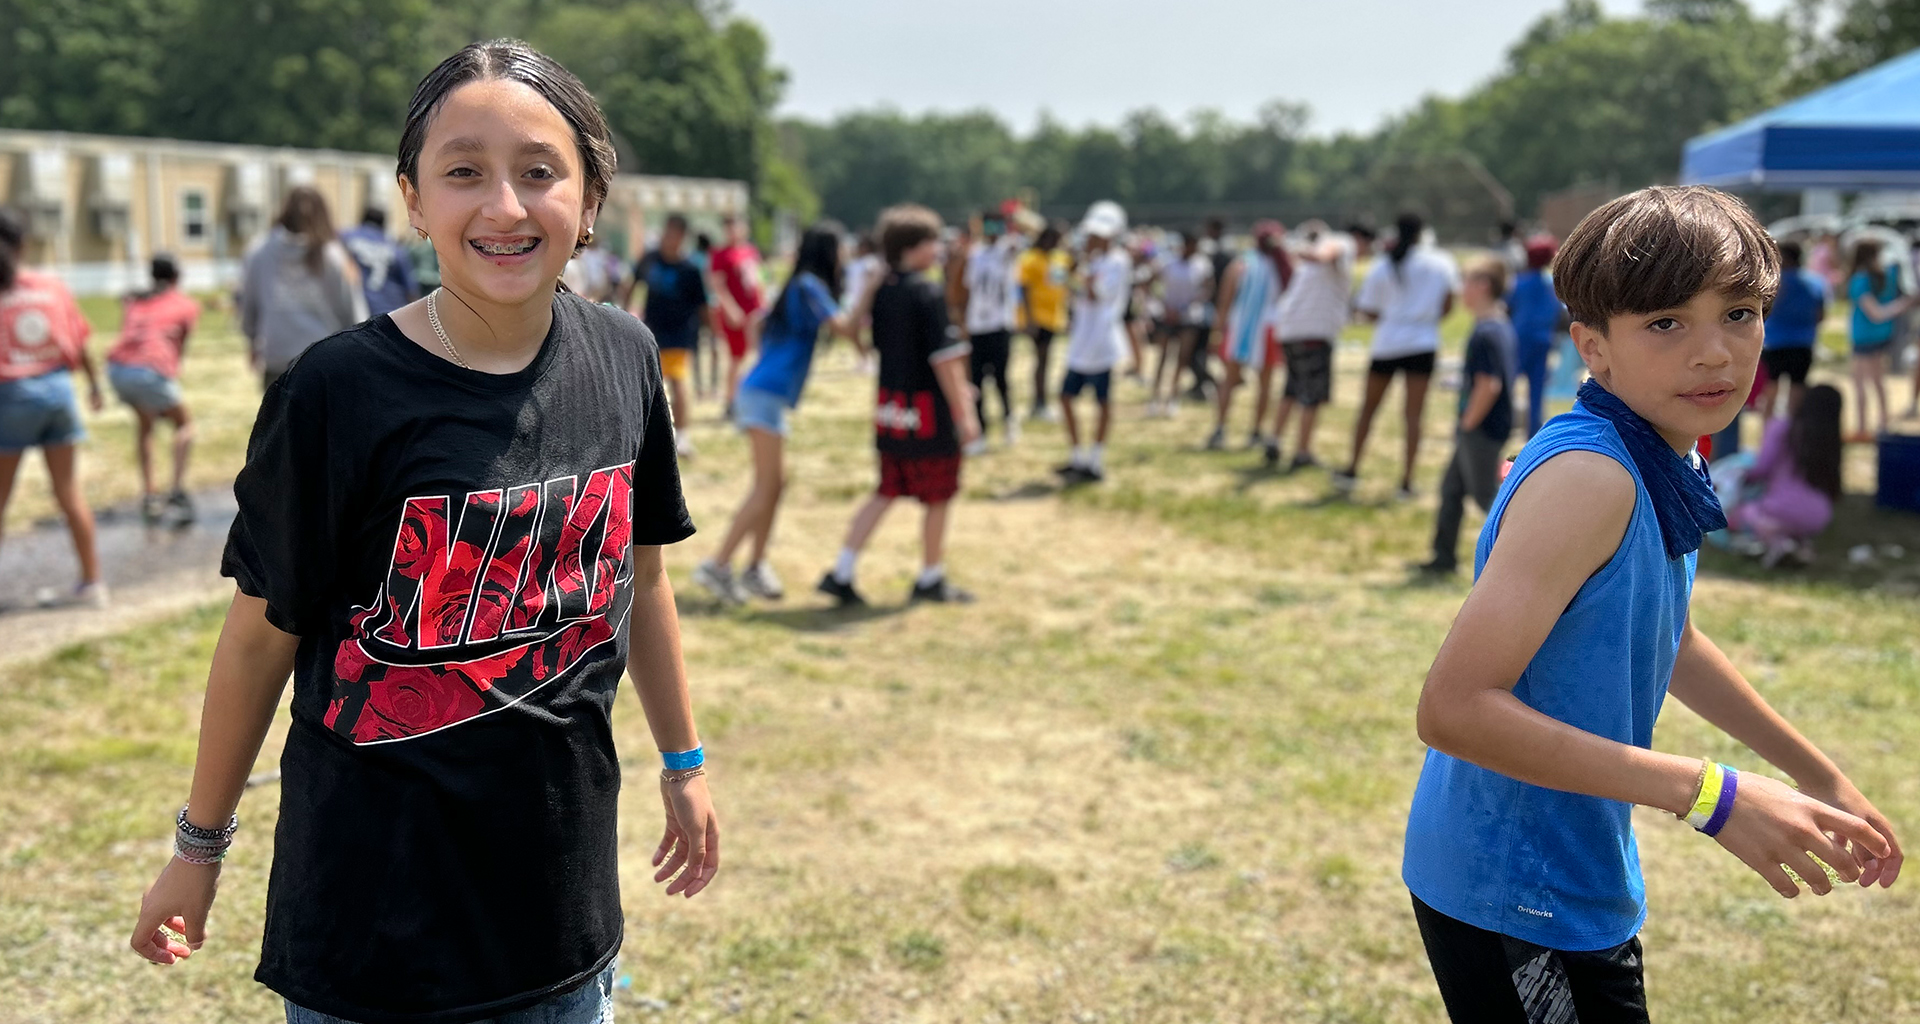 students laughing outside during field day.